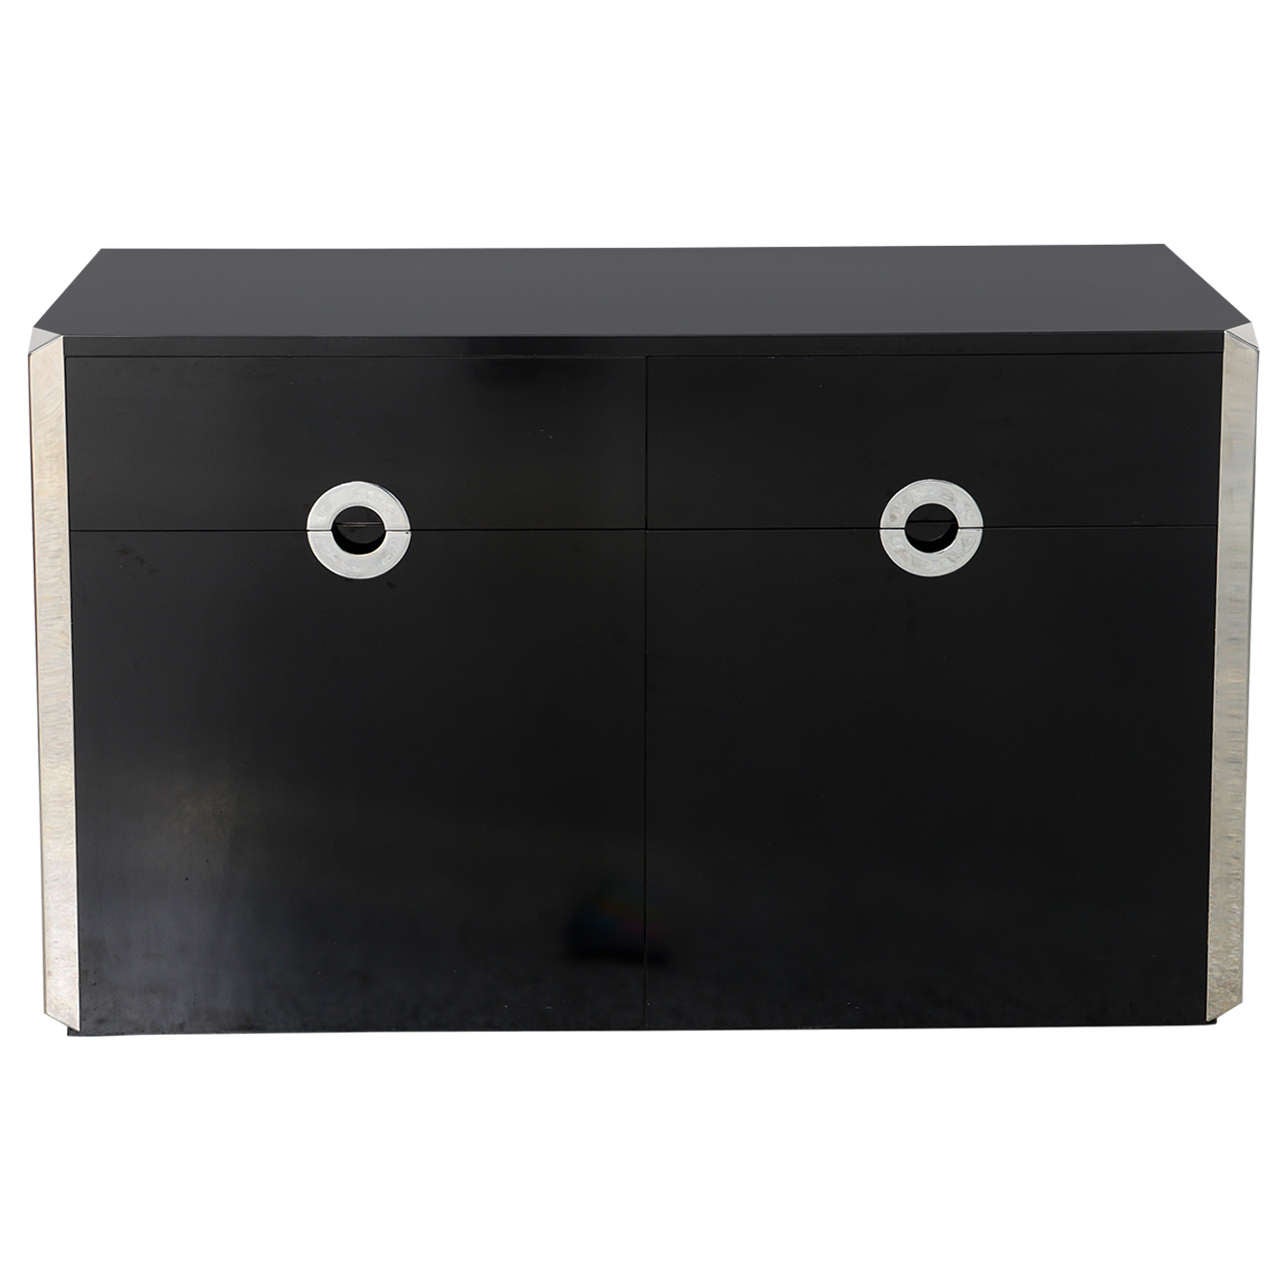 Black Laminate Cabinet with Chrome Trim:  Willy Rizzo, 1970s